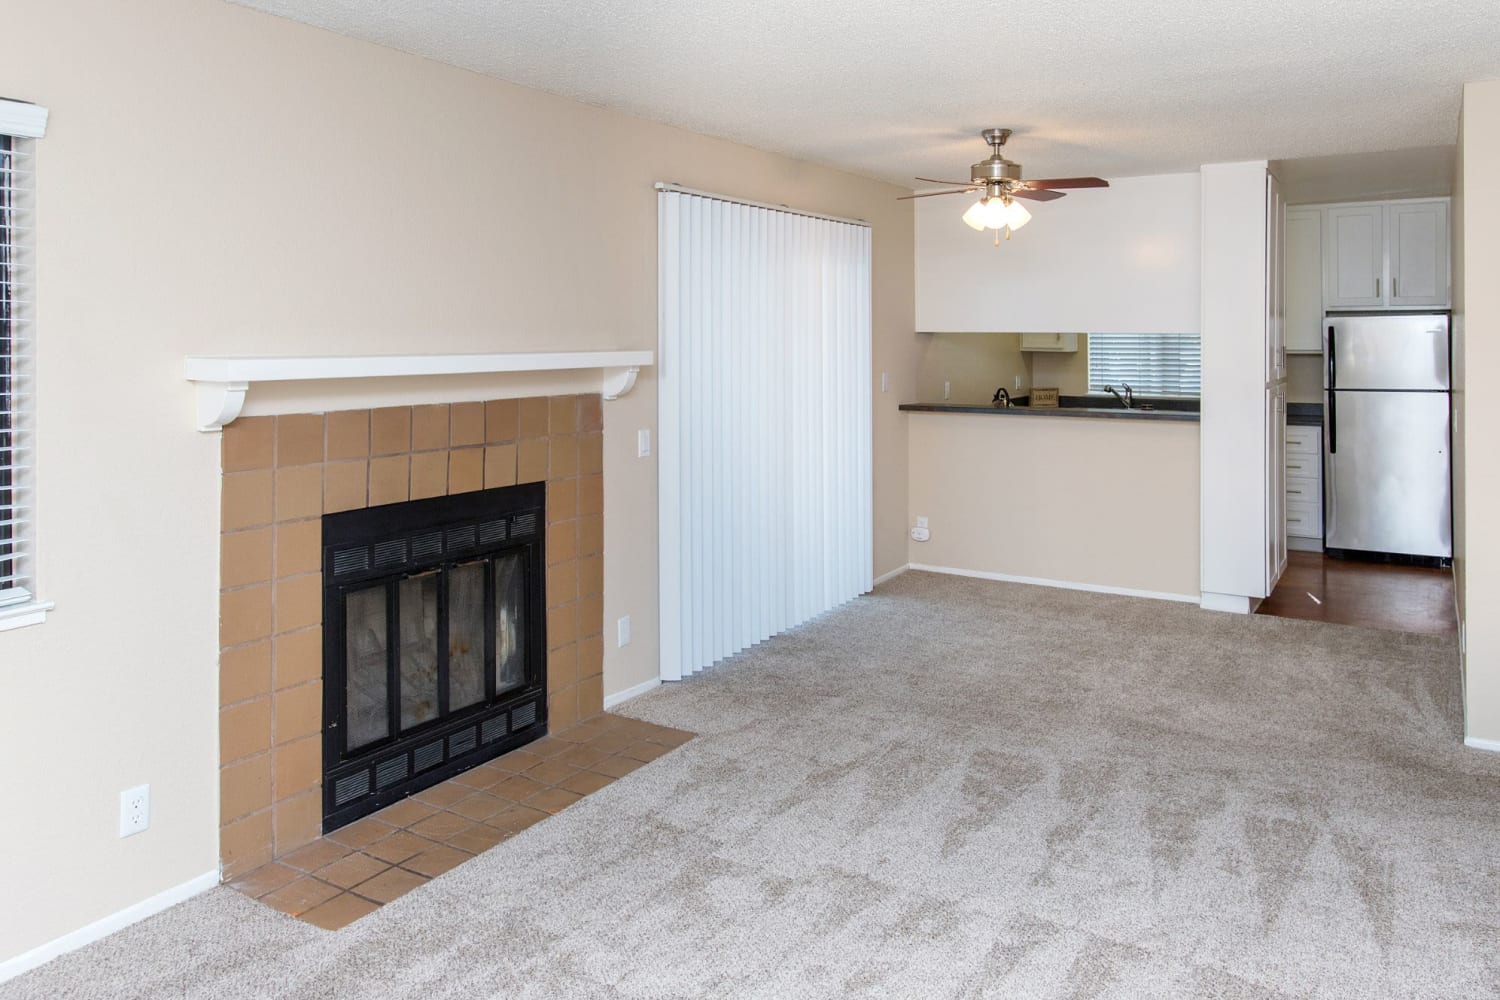 A fireplace in a beautiful open living room floor plan at Amber Court in Fremont, California